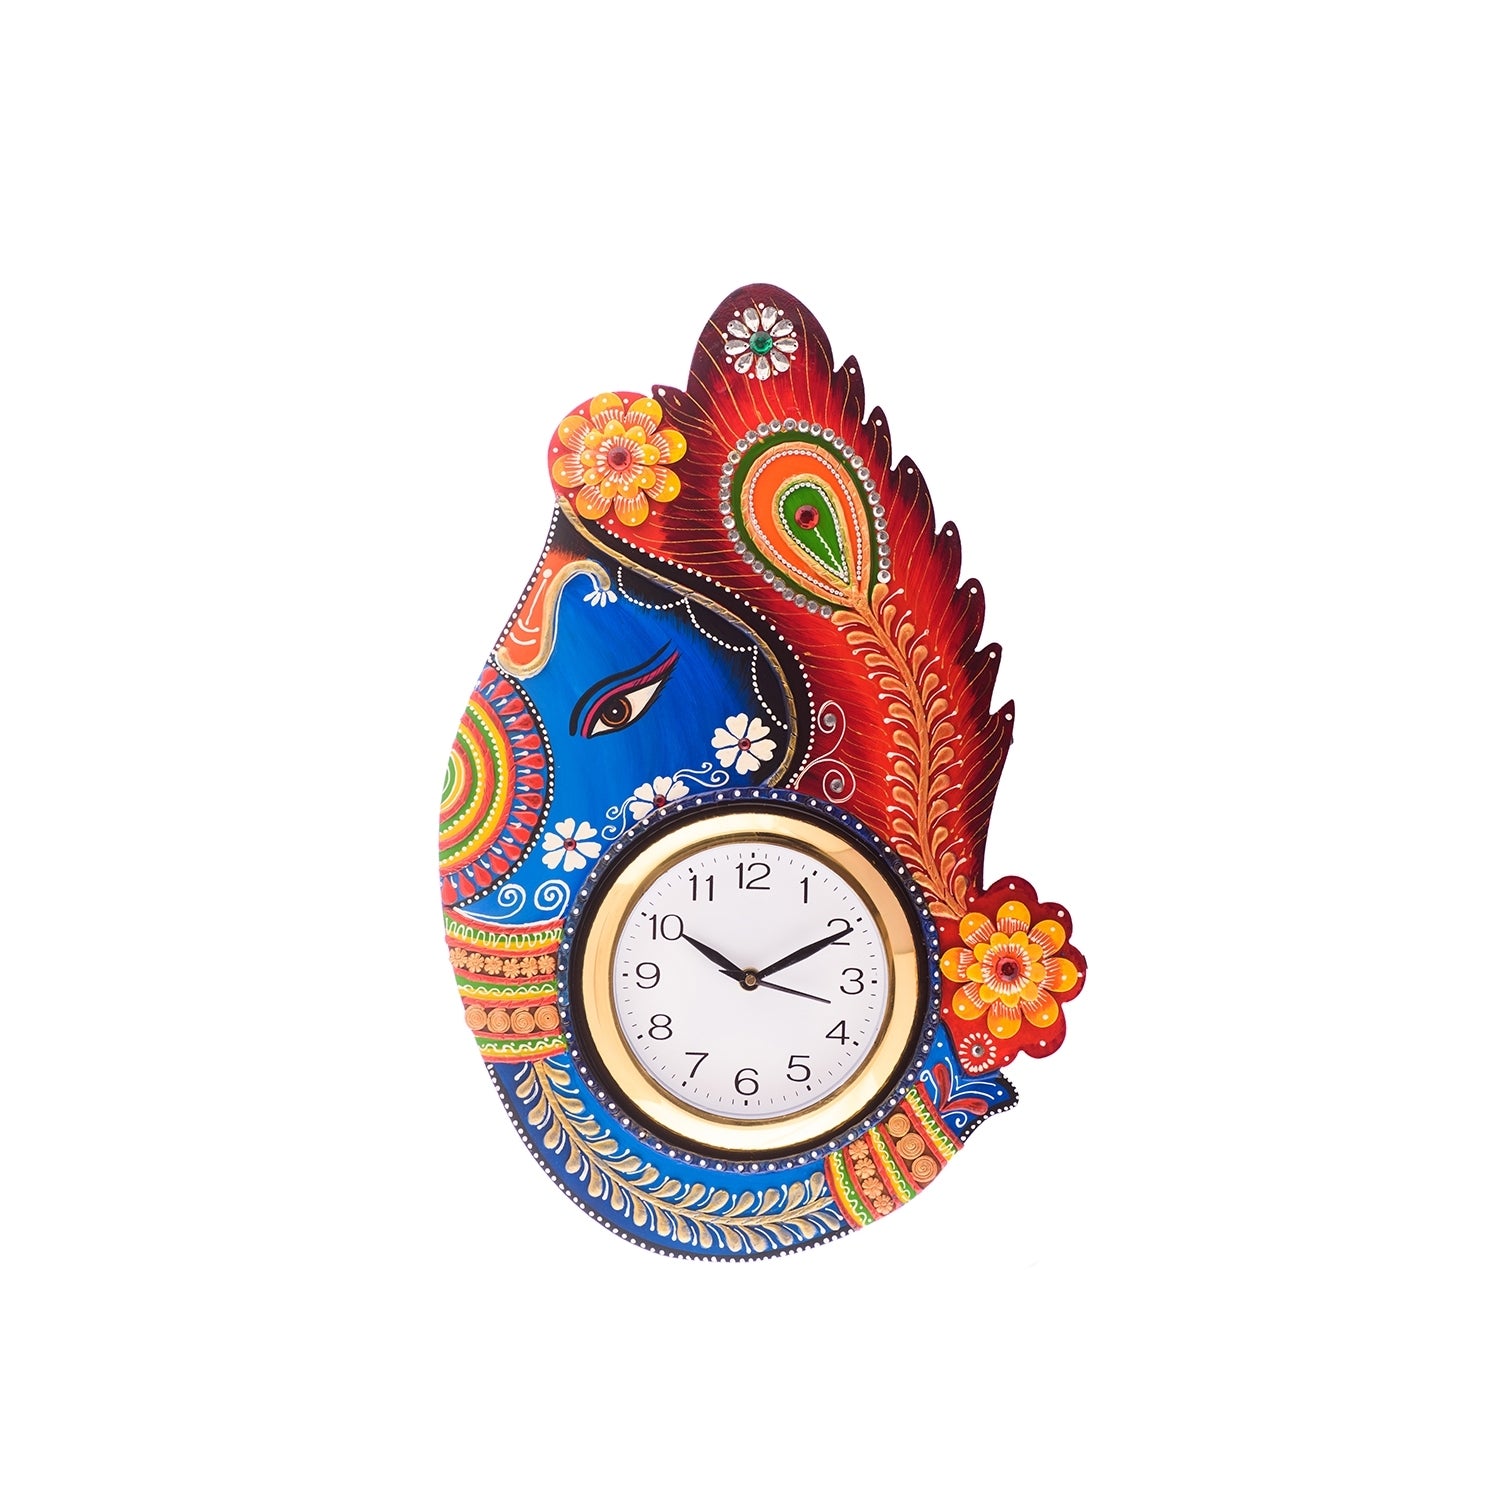 Turban Lord Ganesha Colorful Wooden Handcrafted Wooden Wall Clock (H - 18Inch)